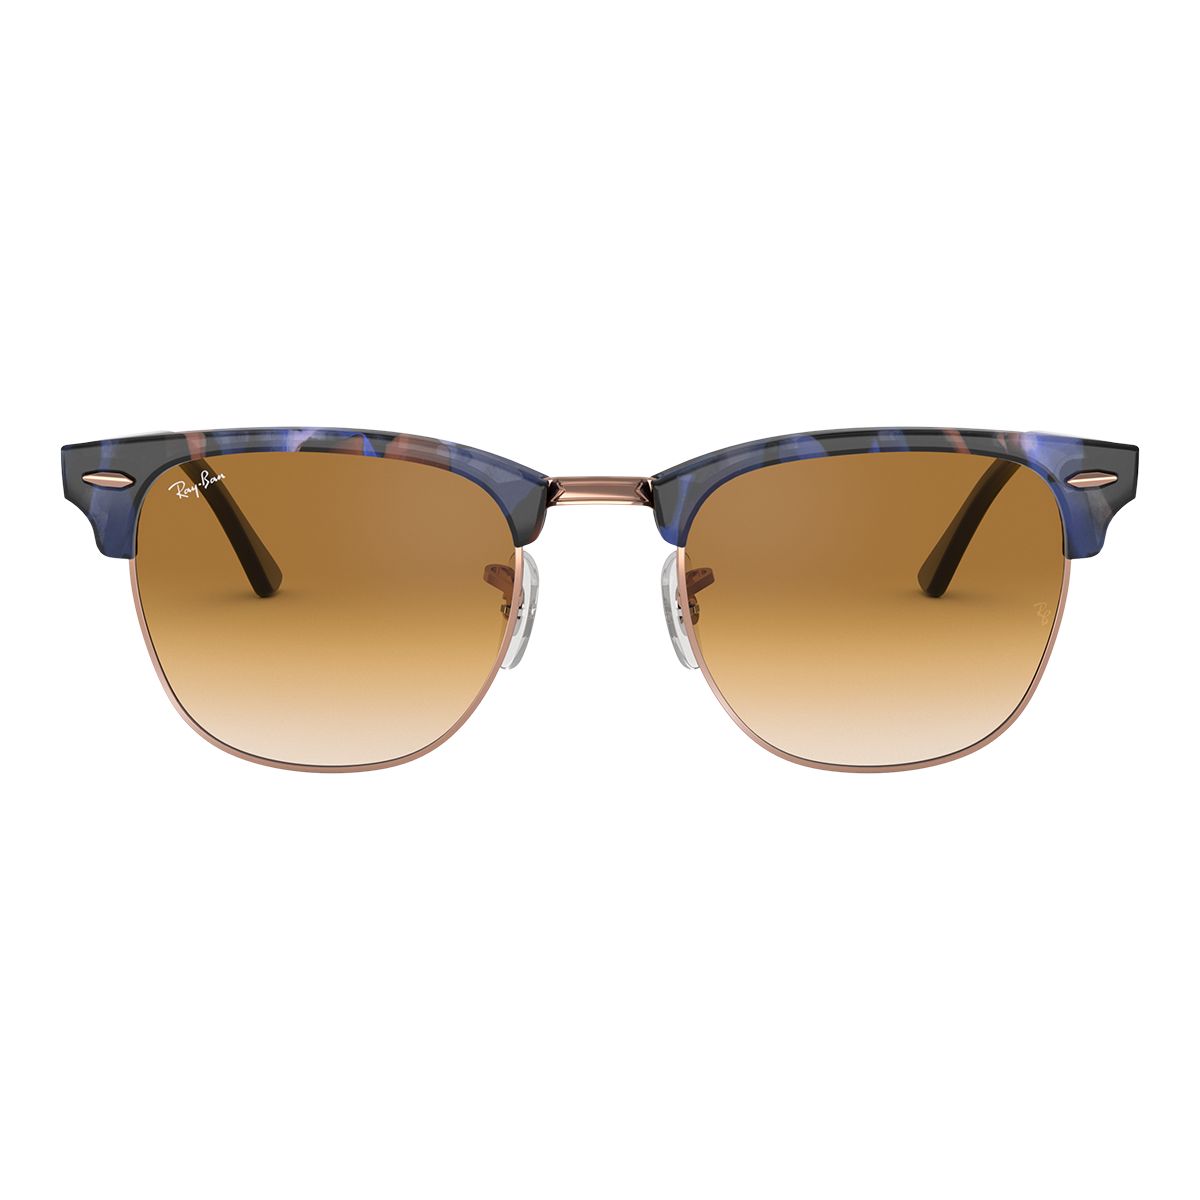 Image of Ray Ban Clubmaster Sunglasses